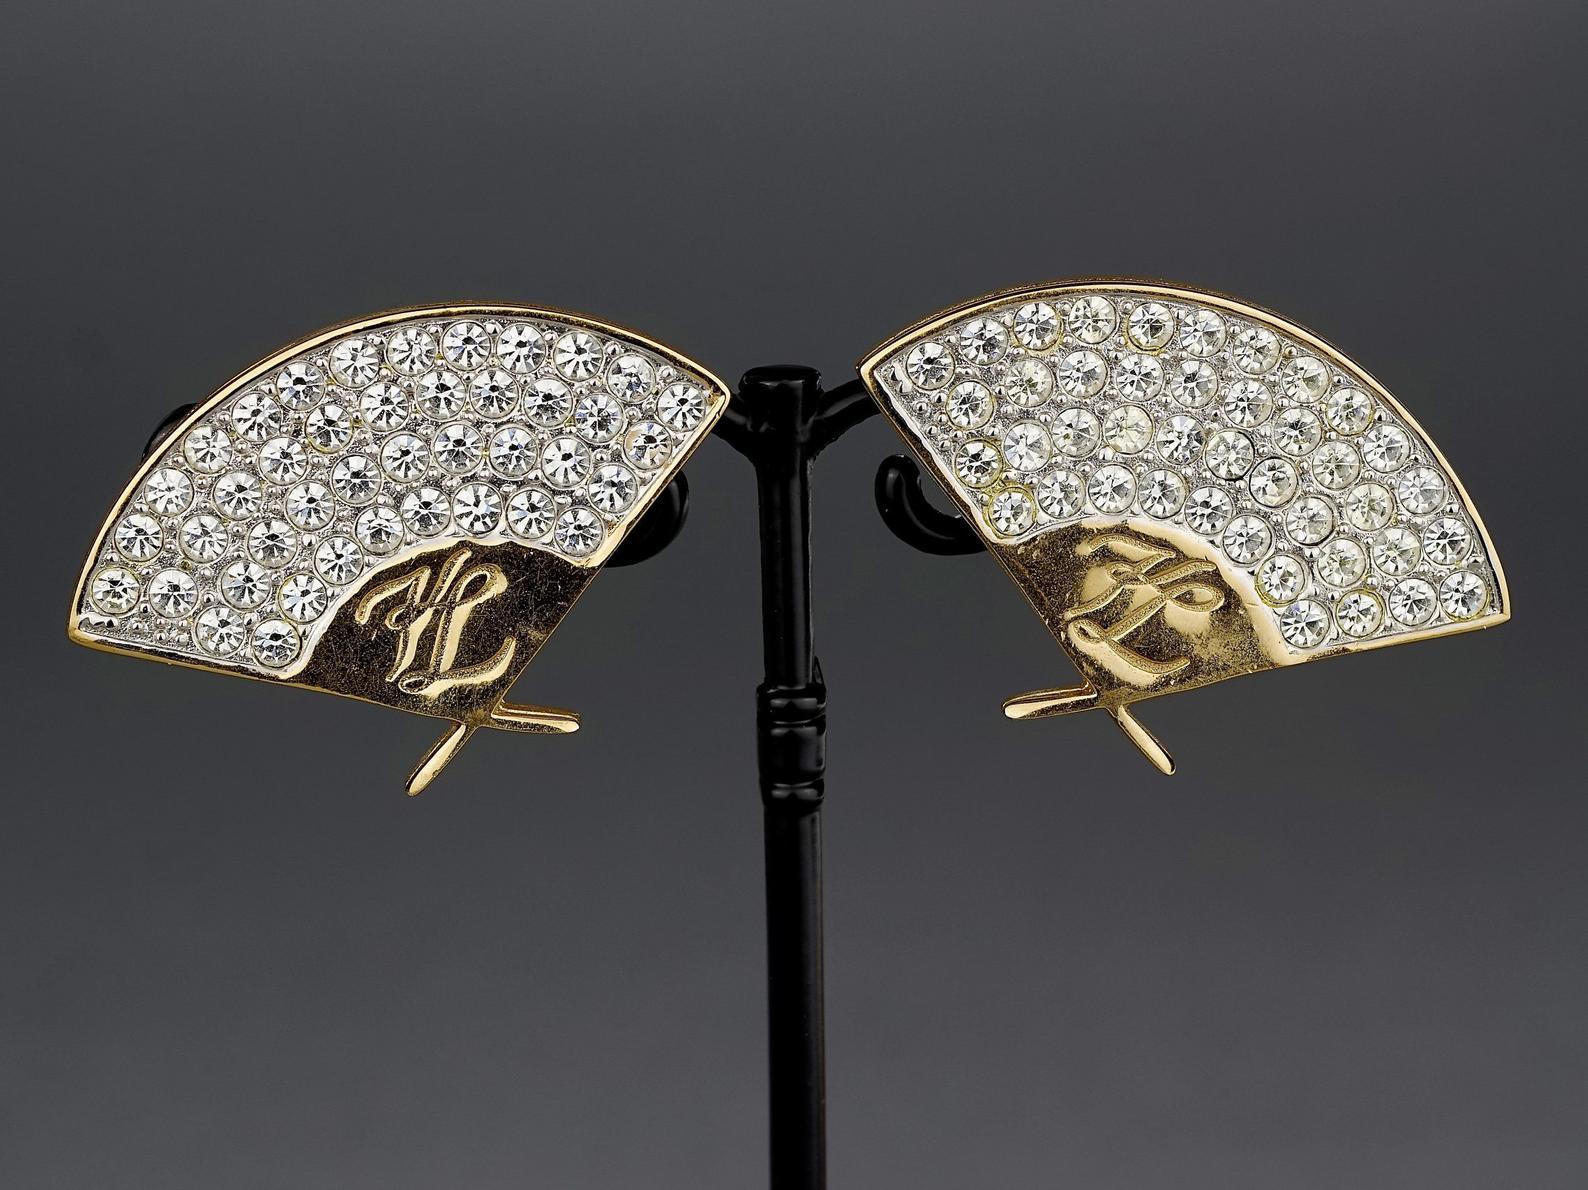 Vintage Iconic KARL LAGERFELD Logo Fan Rhinestone Earrings In Excellent Condition For Sale In Kingersheim, Alsace